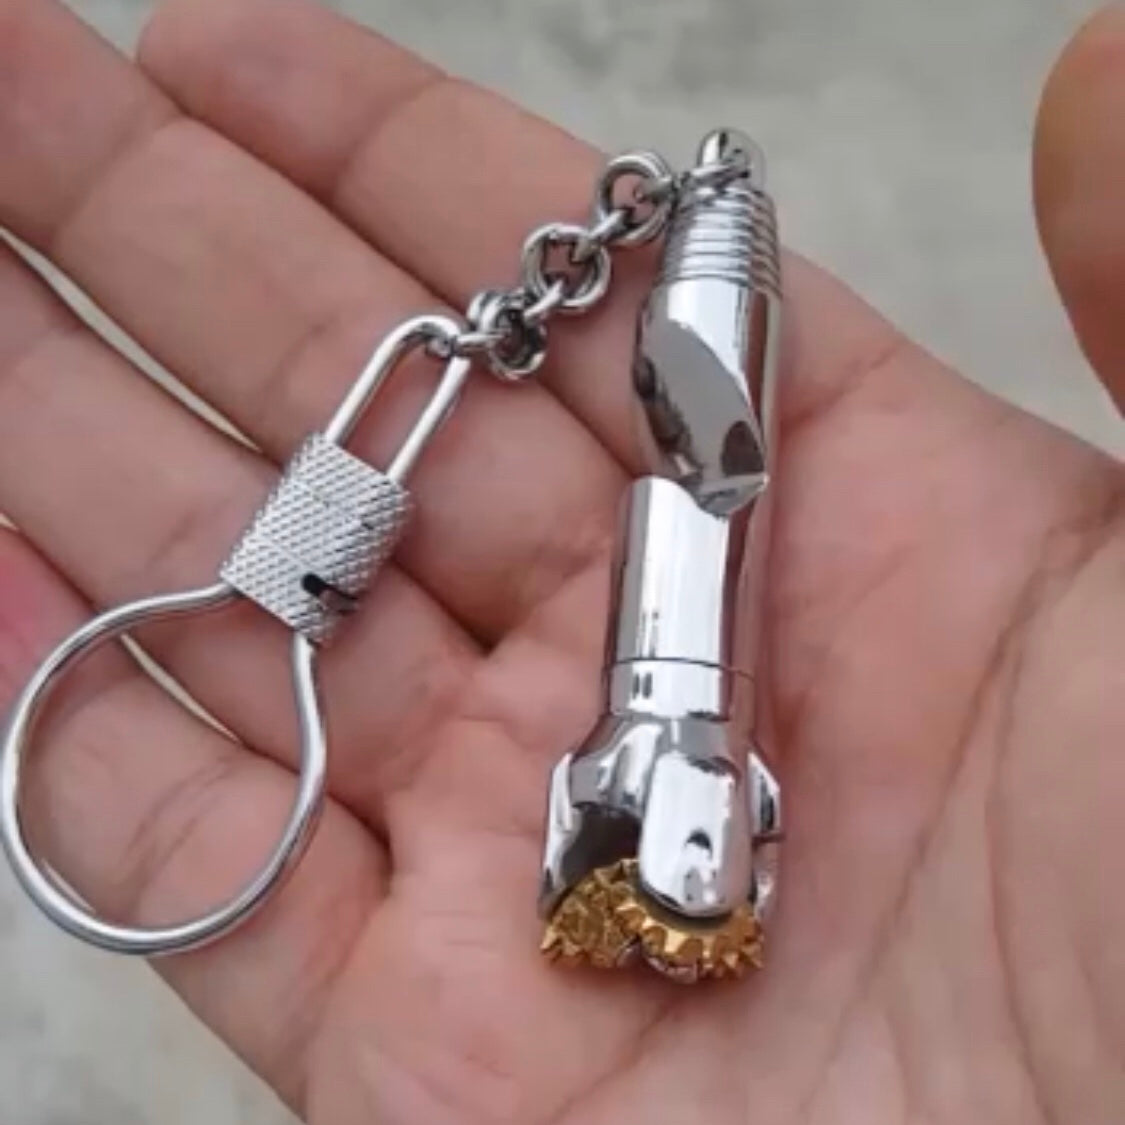 Oilfield Stainless Steel and Bronze Tricone Drill Bit Bottle Opener and Keychain